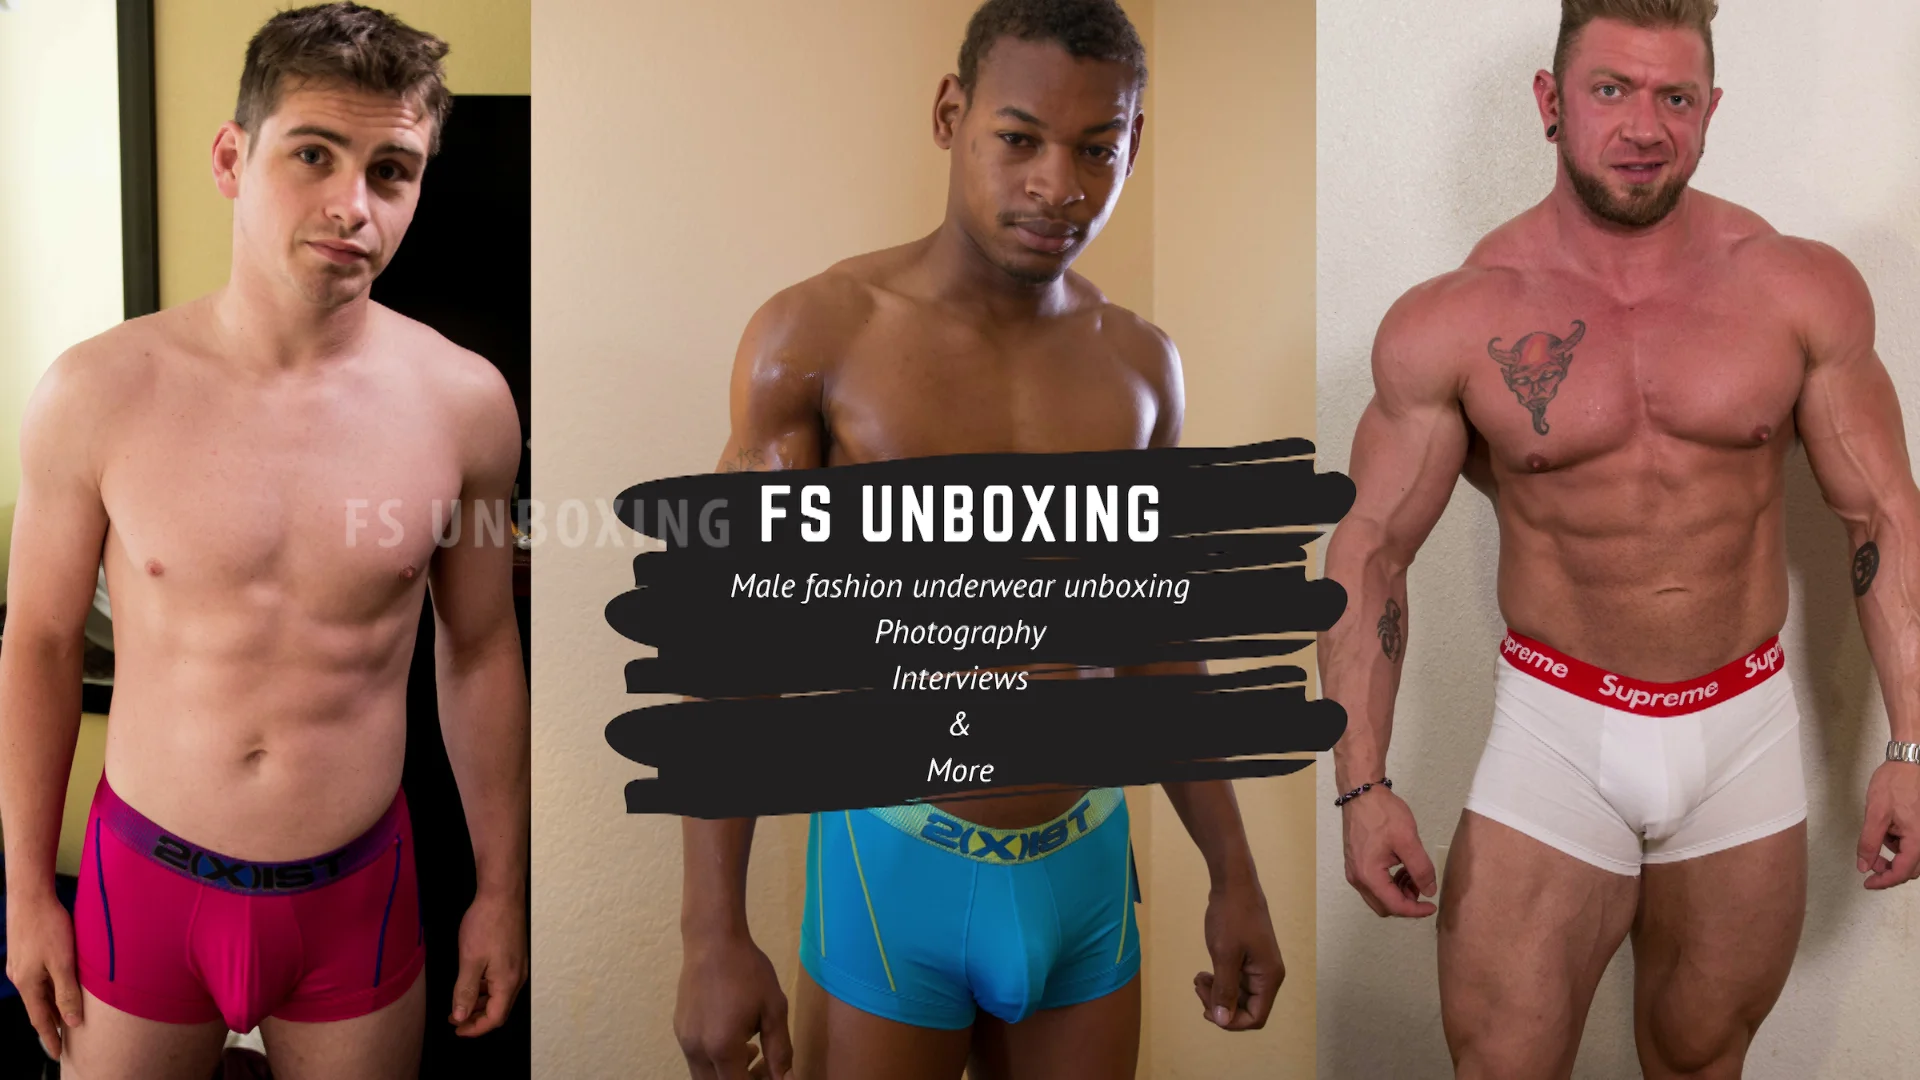 Speakeasy Briefs - All the hunks have a pair #runway #fashionshow  #boxers #boxerbriefs #kickstarter #underwear #flask #party #booze #hunk  #malemodel